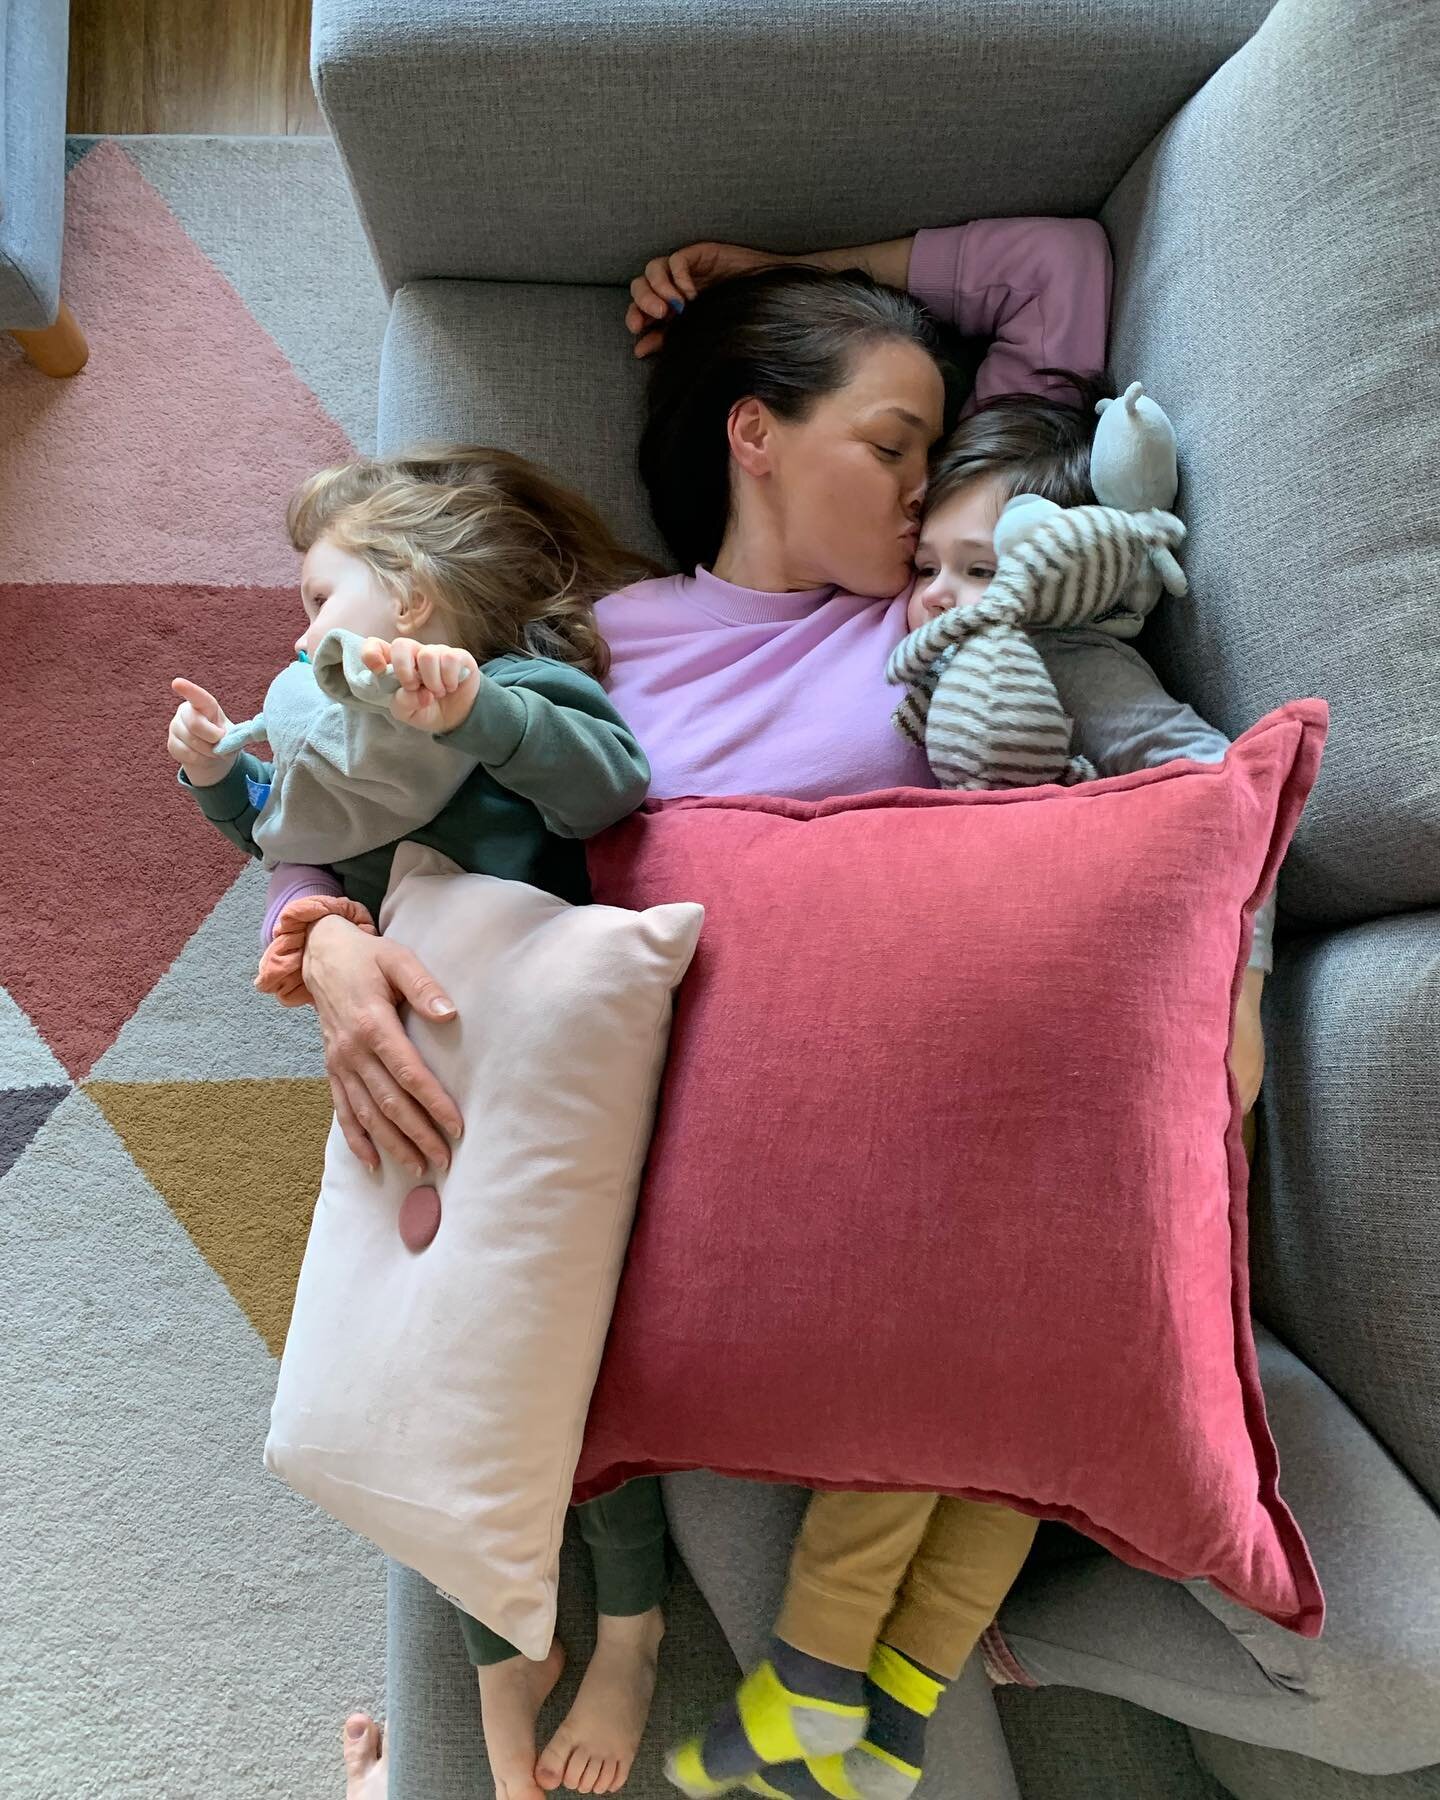 It seems like personal space no longer exits. 

All @mrs_tasha_white wanted to do on Sunday was put her feet up while at least one child was sleeping....
This woman is doing an incredible job, she never stops, she never gives up and she never rests /